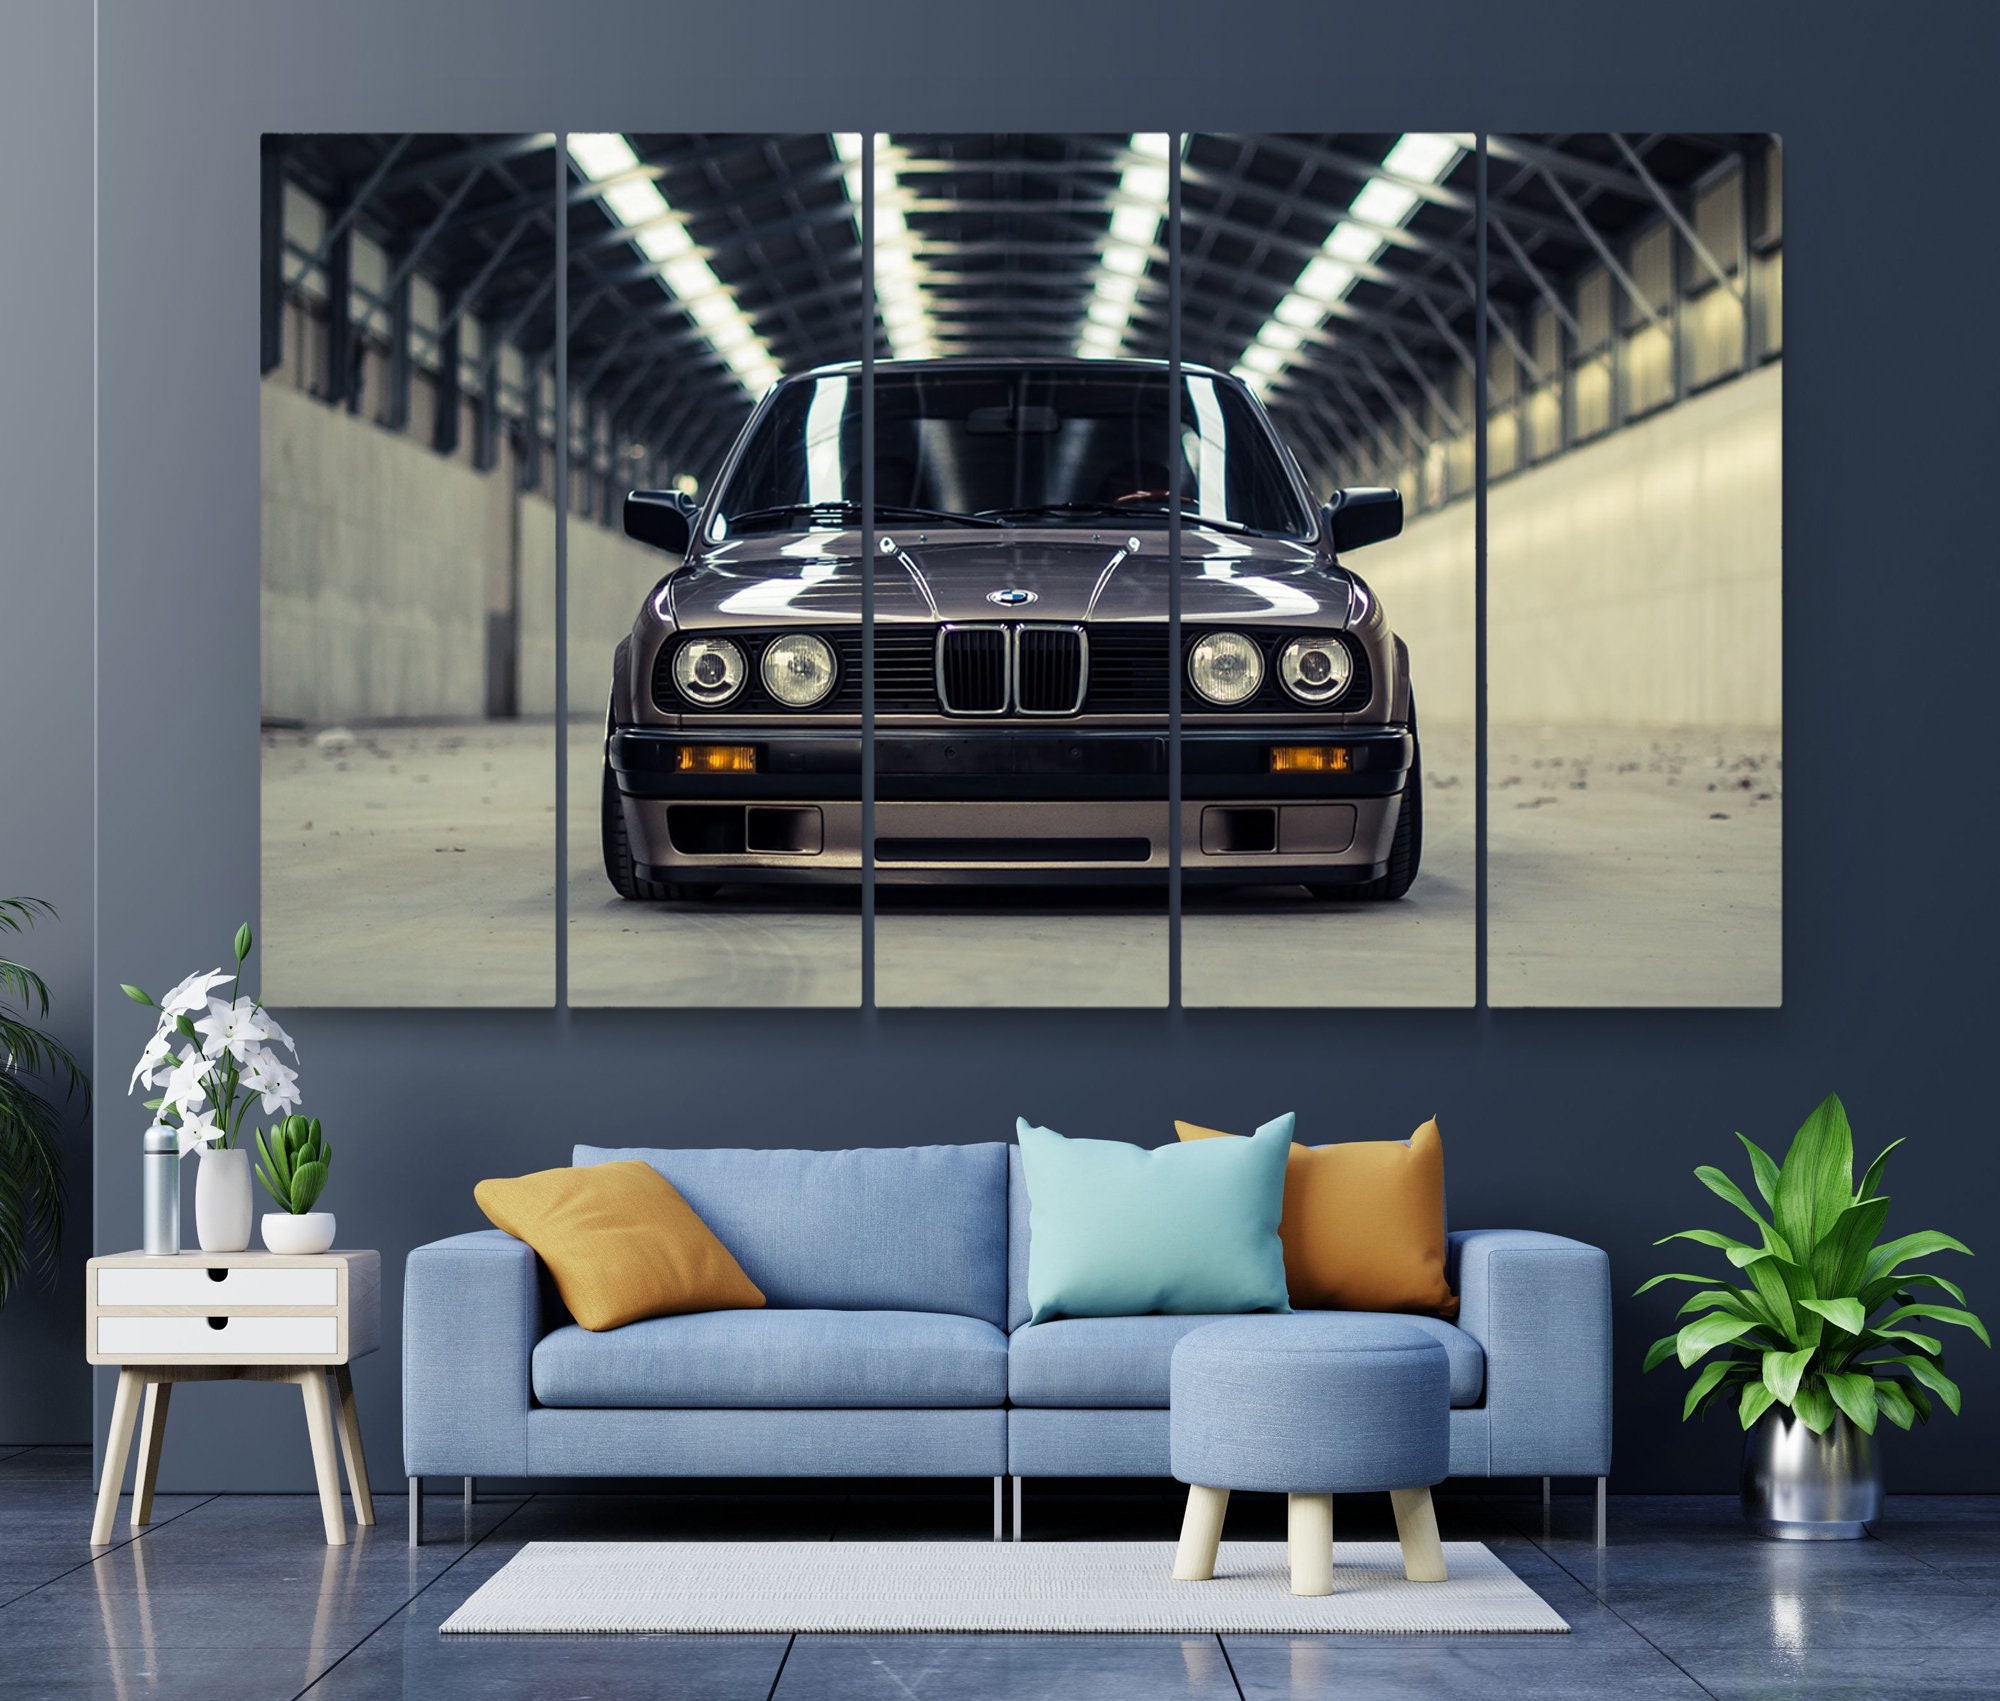 BMW M3 E30 M4 Racing Car Canvas Painting Decorative Posters And Prints Wall  Picture Art For Home Bedroom Decor - AliExpress